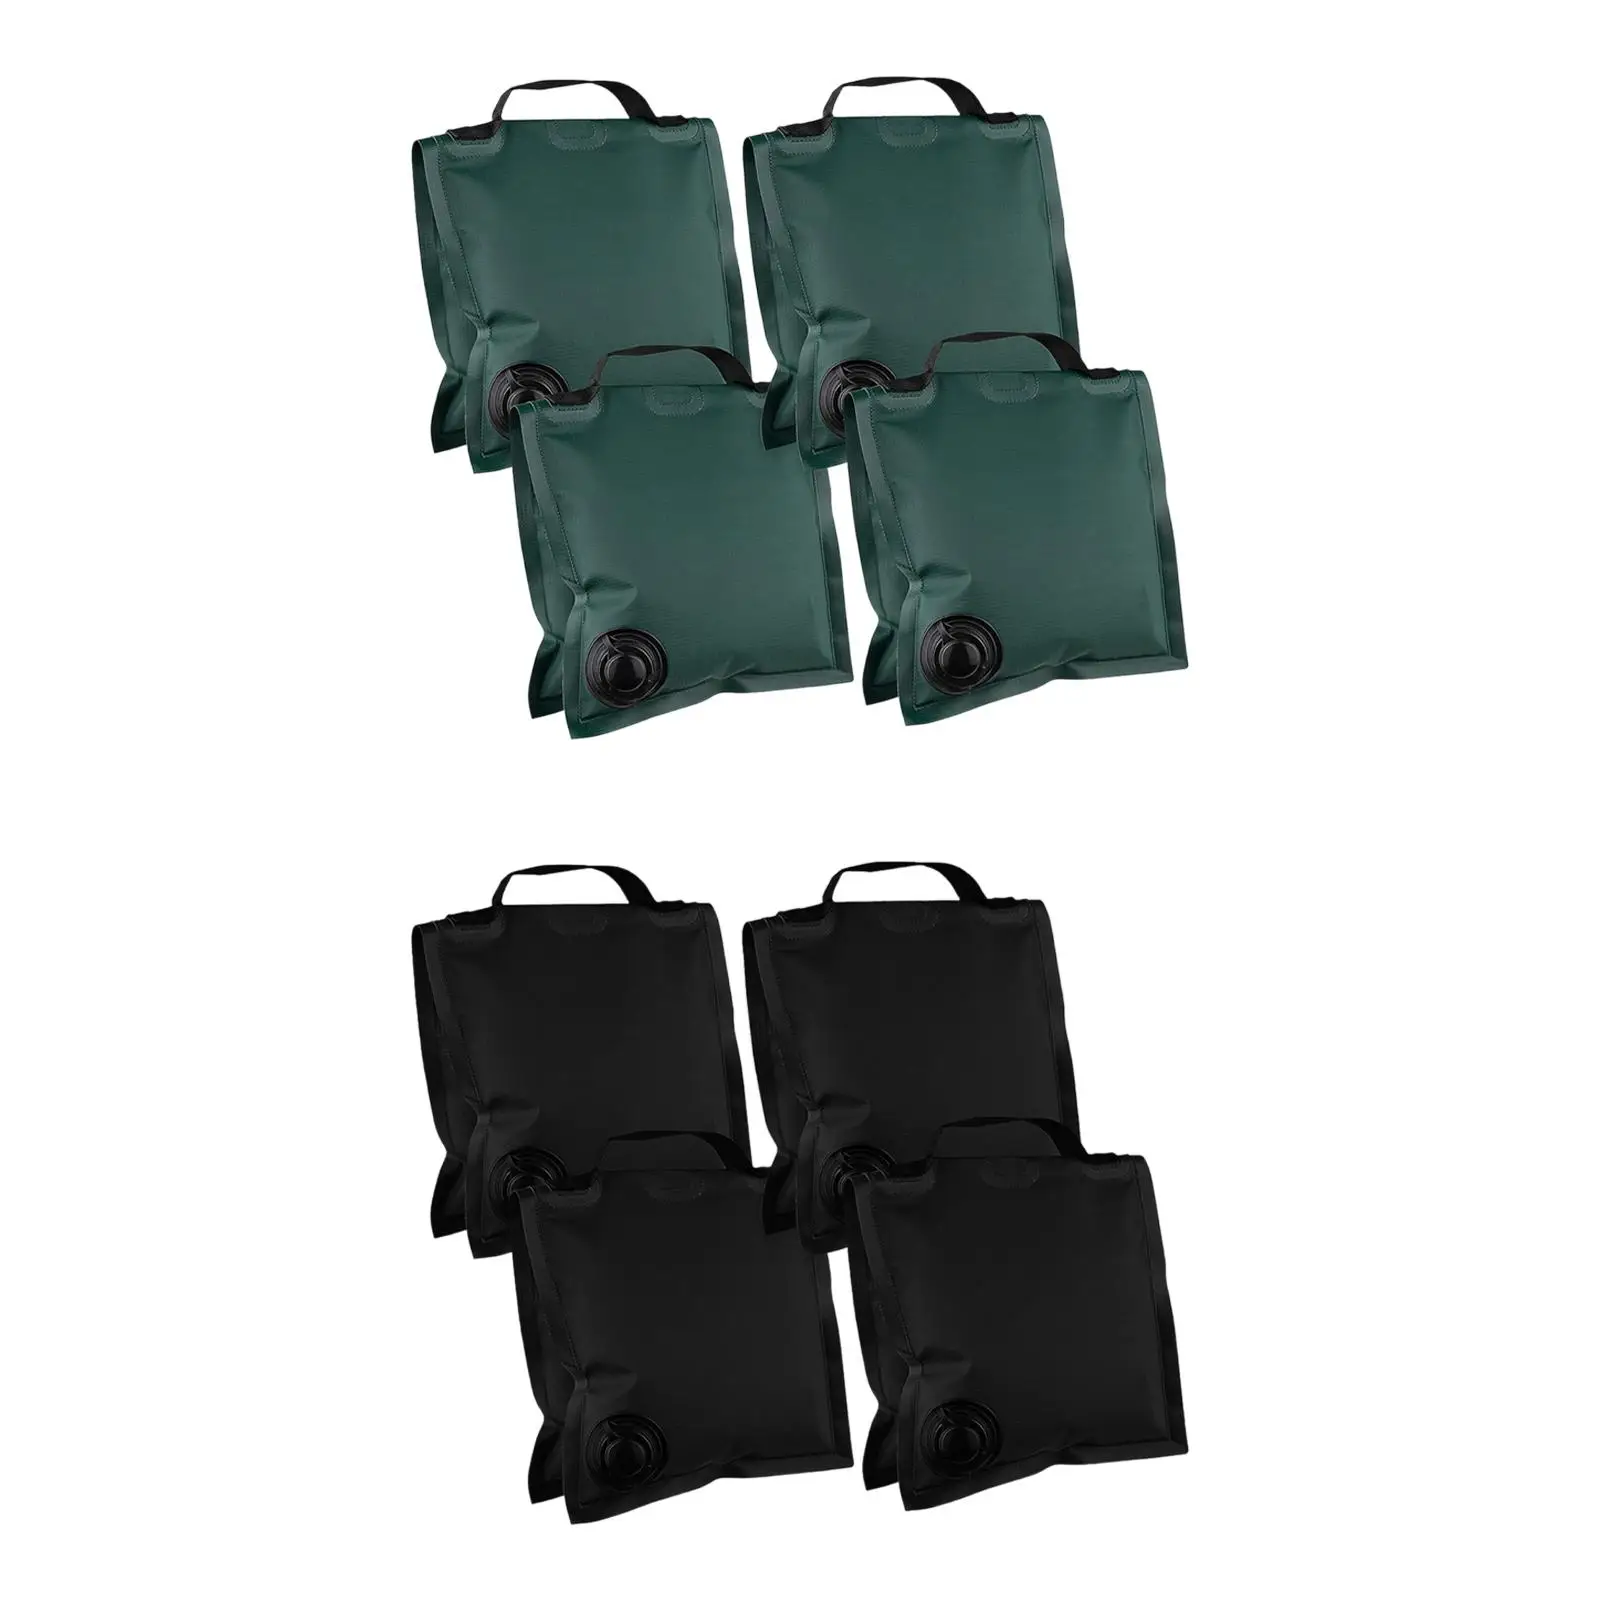 

4Pcs Canopy Weight Bags Large Capacity Foldable Filled with Water Fixing Water Bags for Camping Tent Camera Umbrella Beach